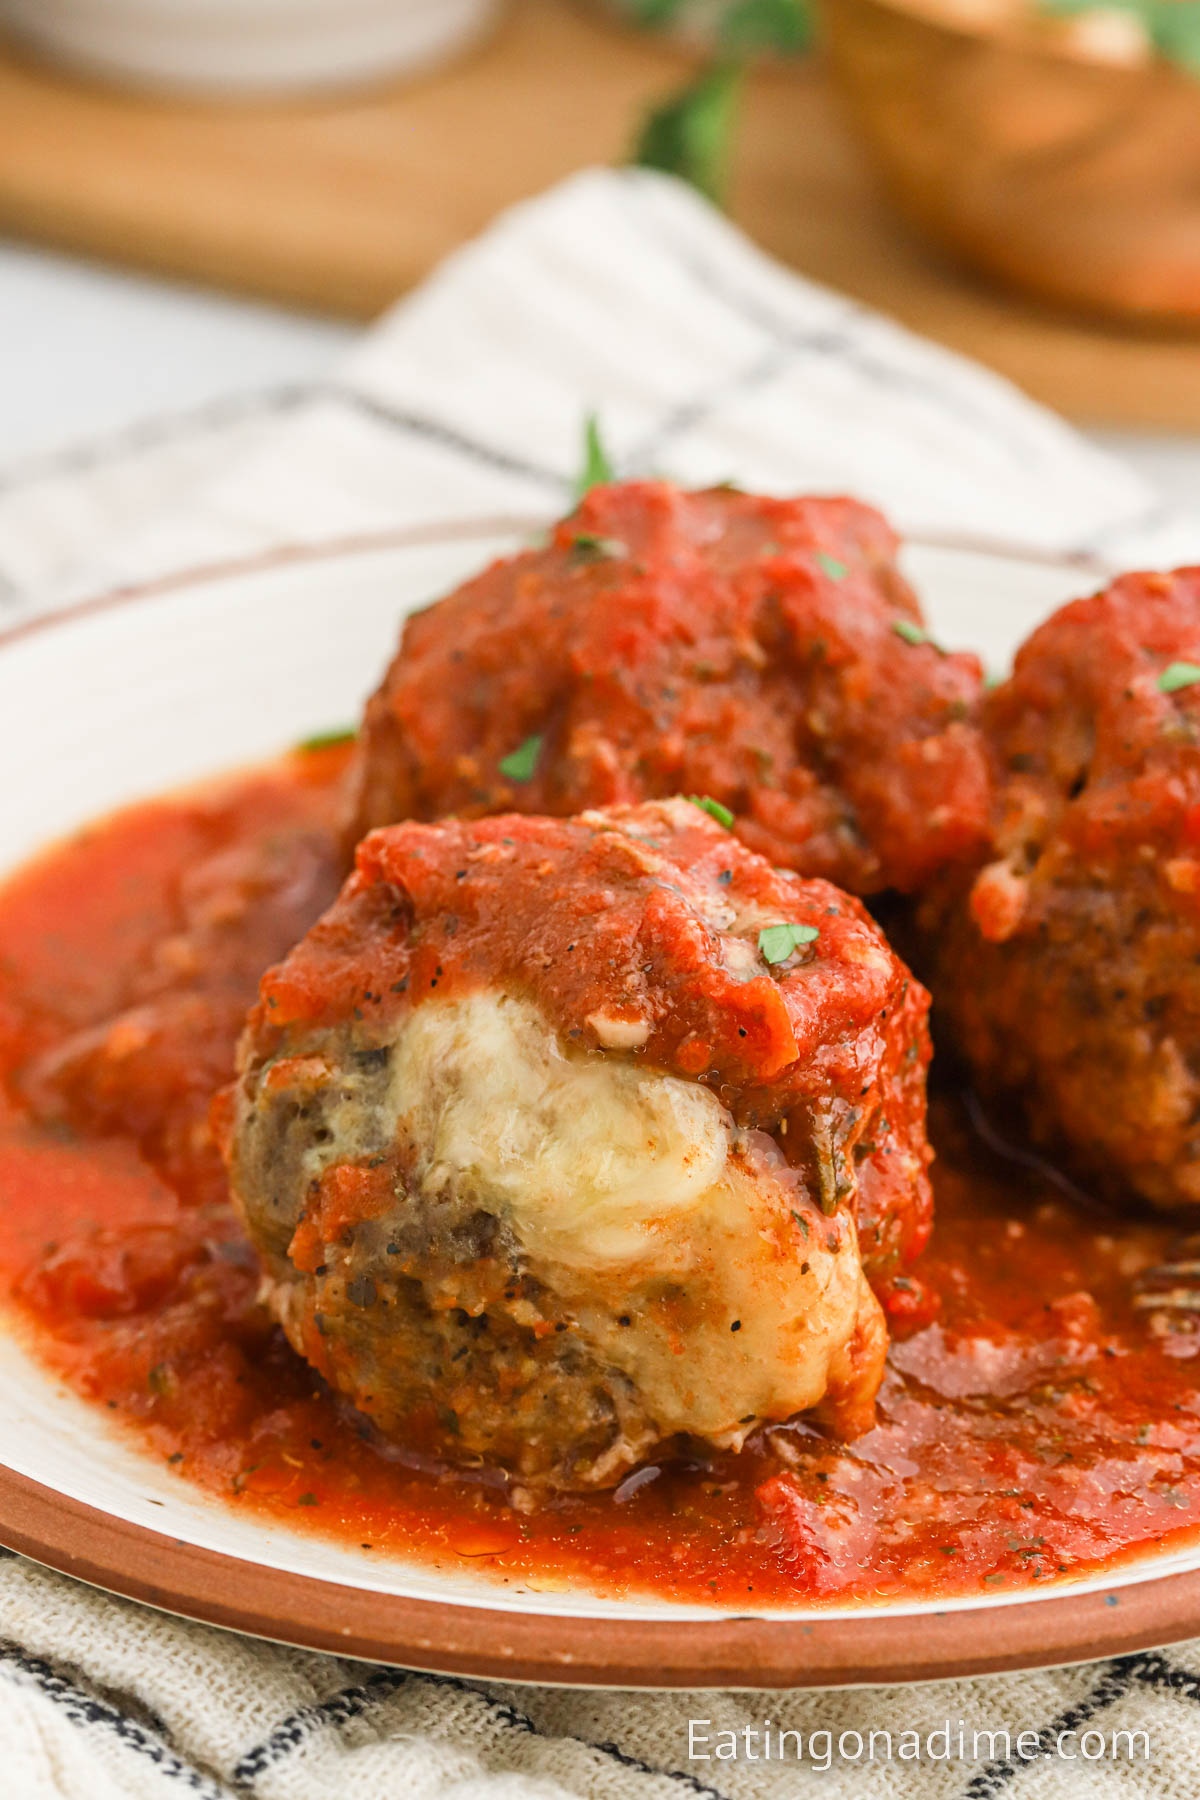 Stuffed meatballs on a plate with sauce